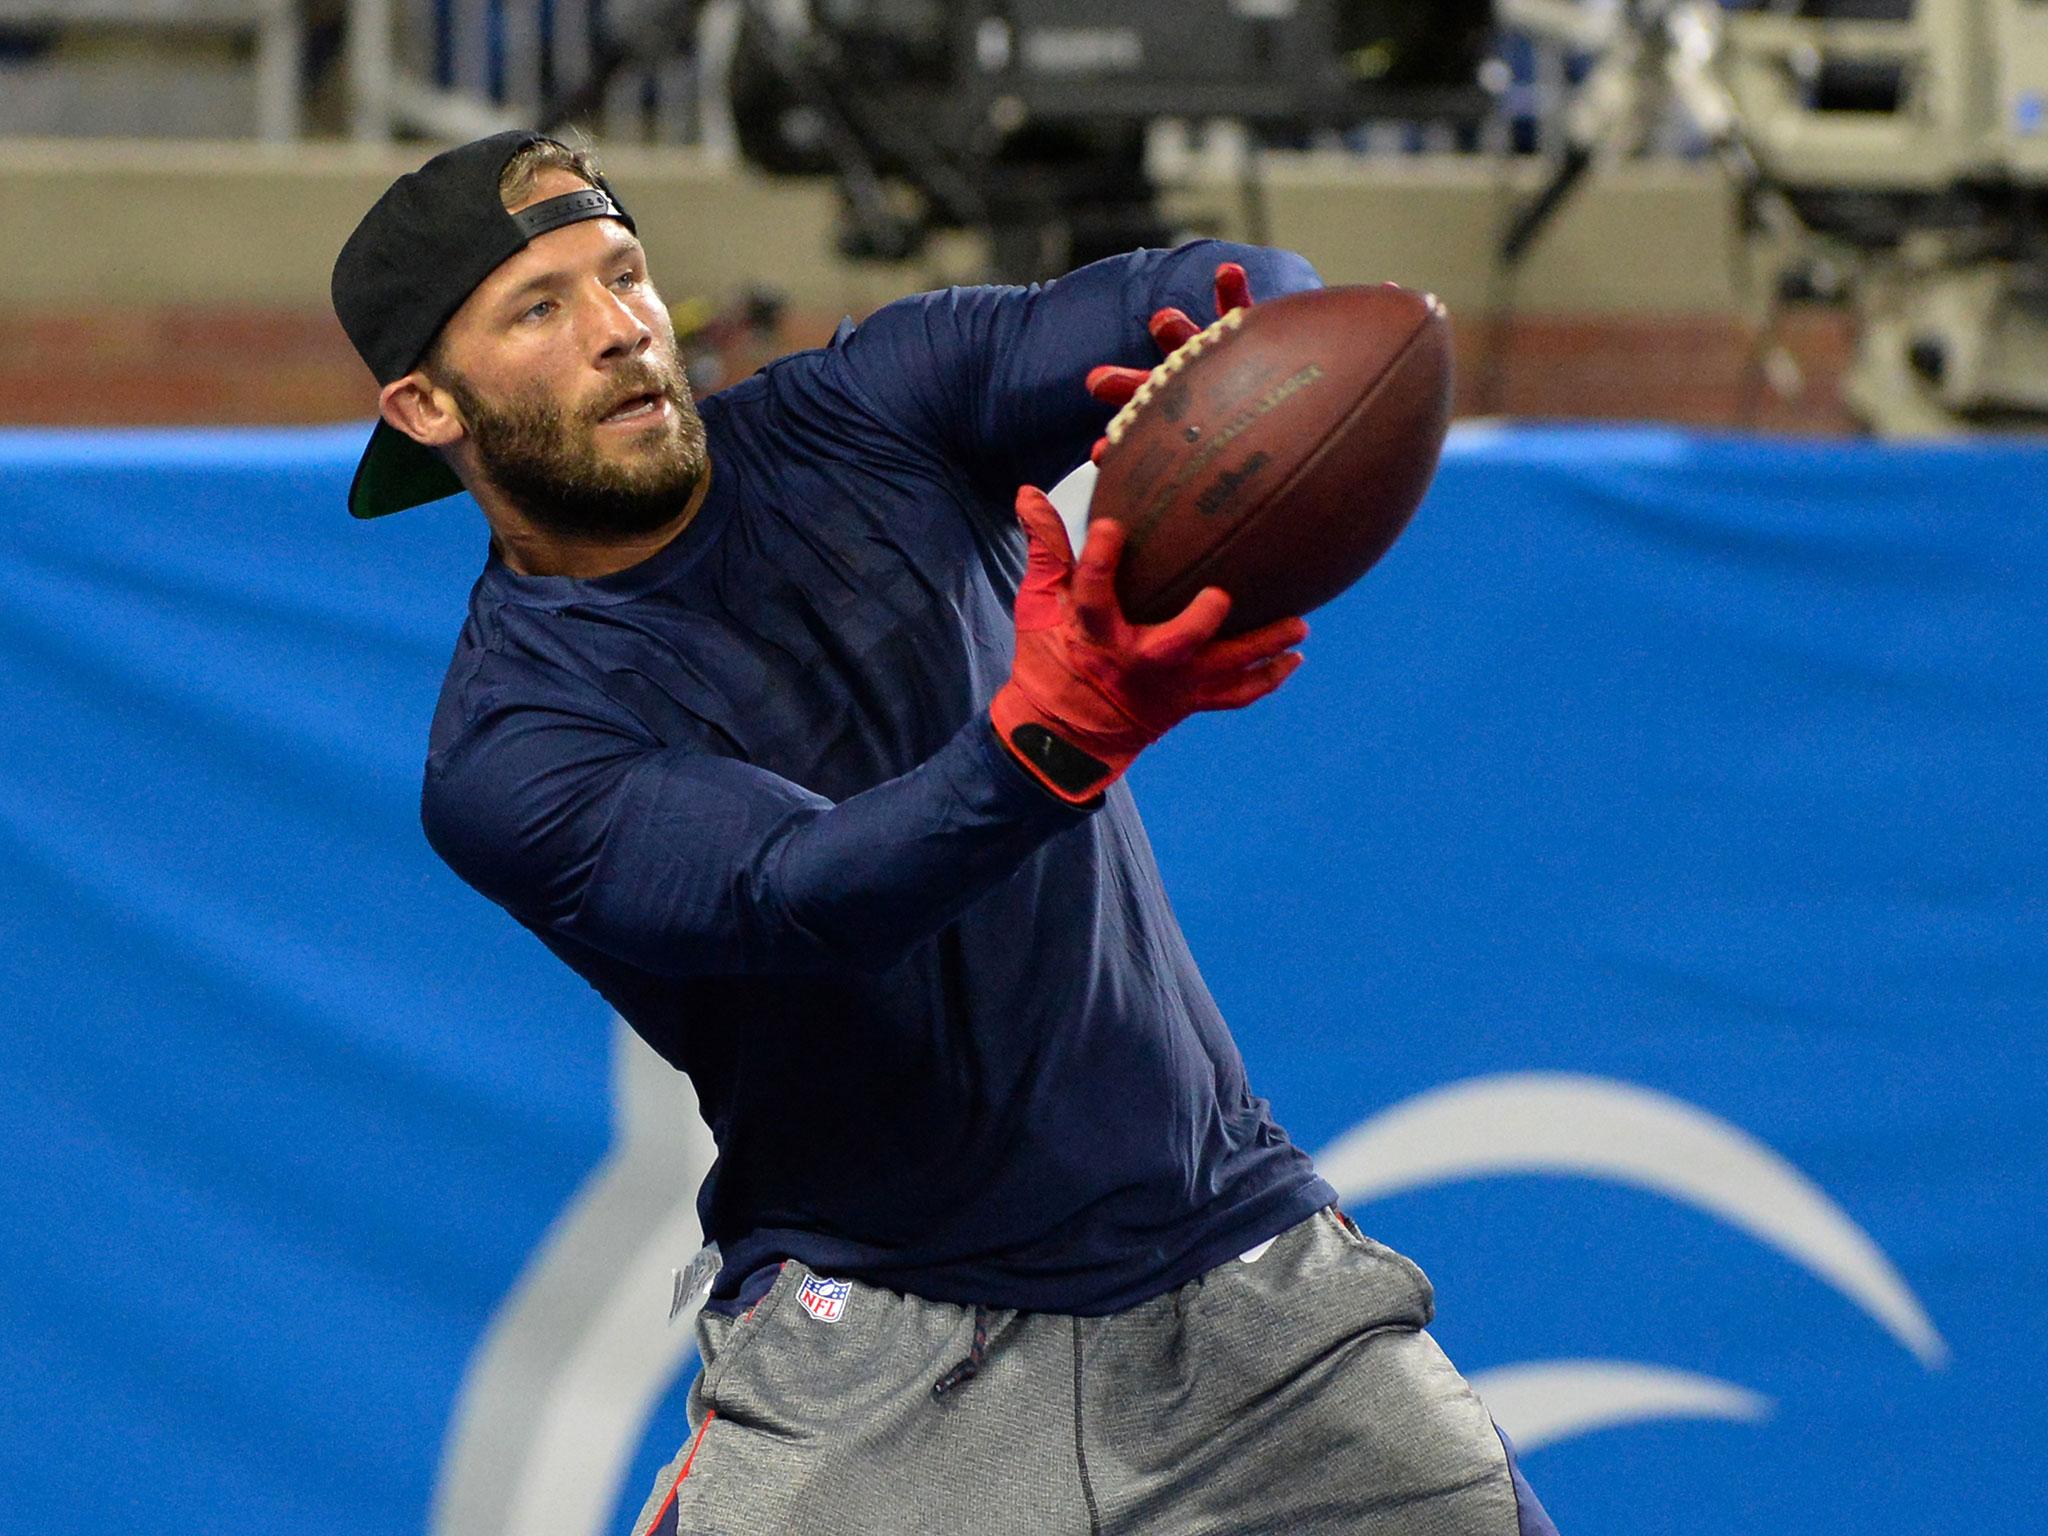 Edelman called the man who tipped him off “the real hero” and says he plans to send him a gift